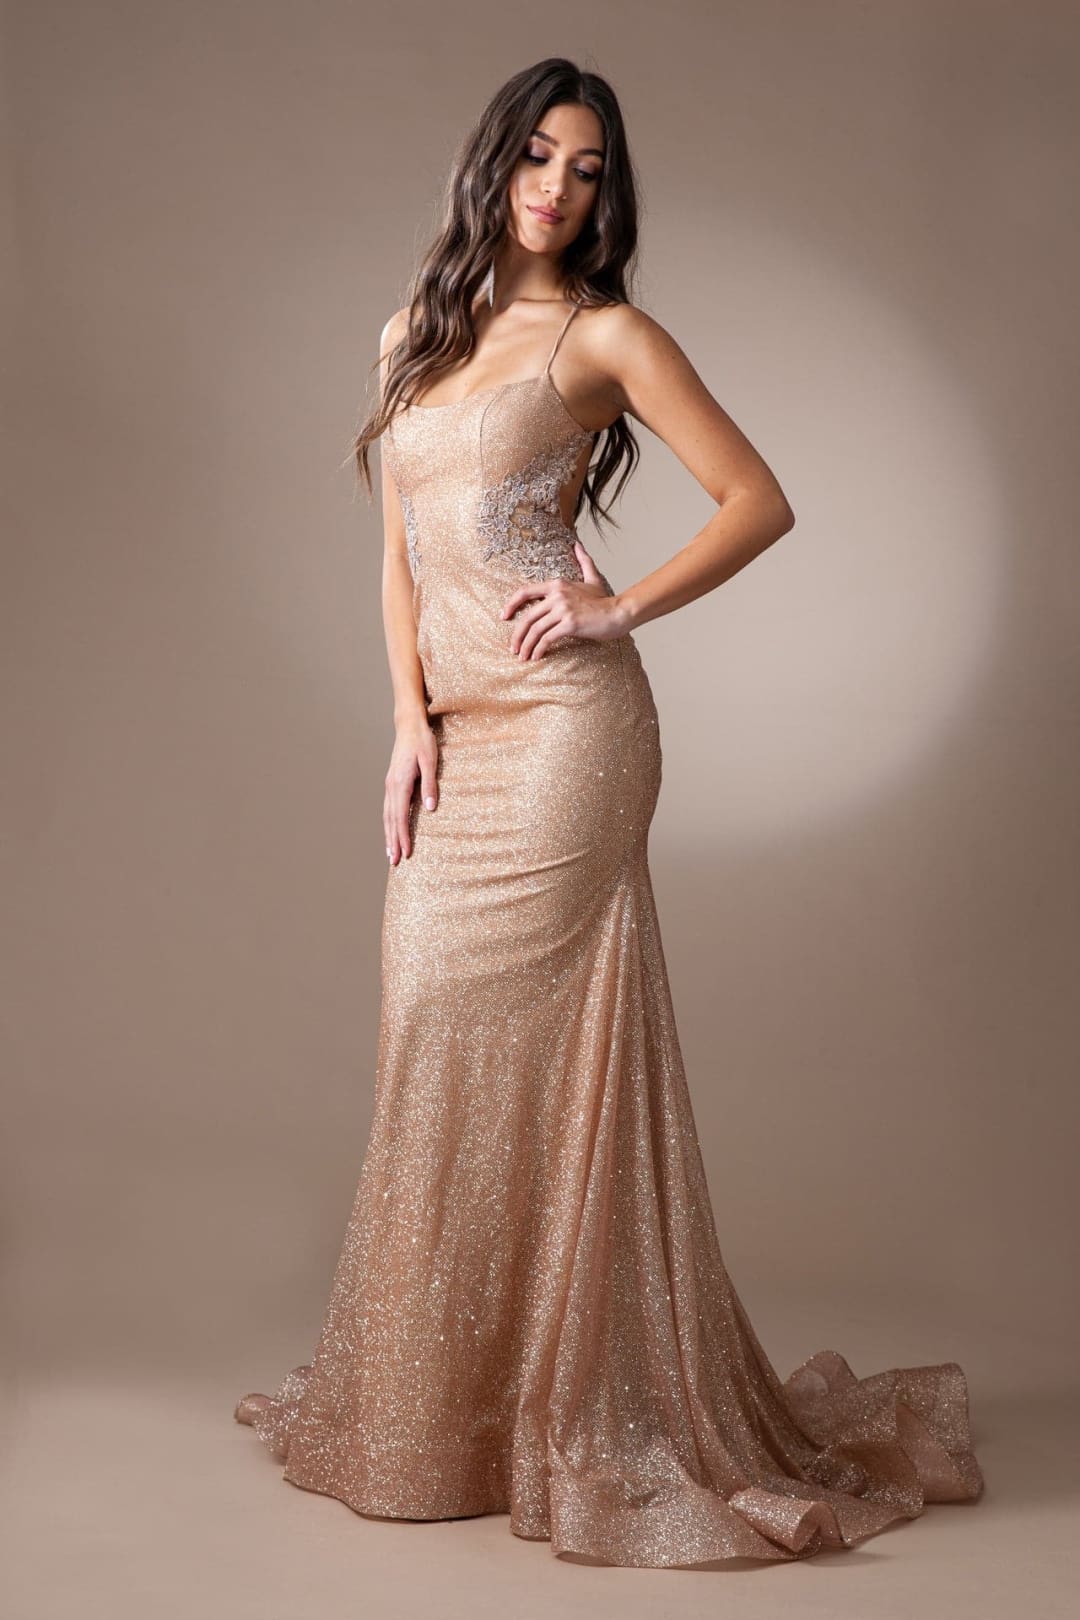 Amelia Couture TM1014 Sexy Backless Adjustable Straps Long Prom Dress - ROSE GOLD / Dress